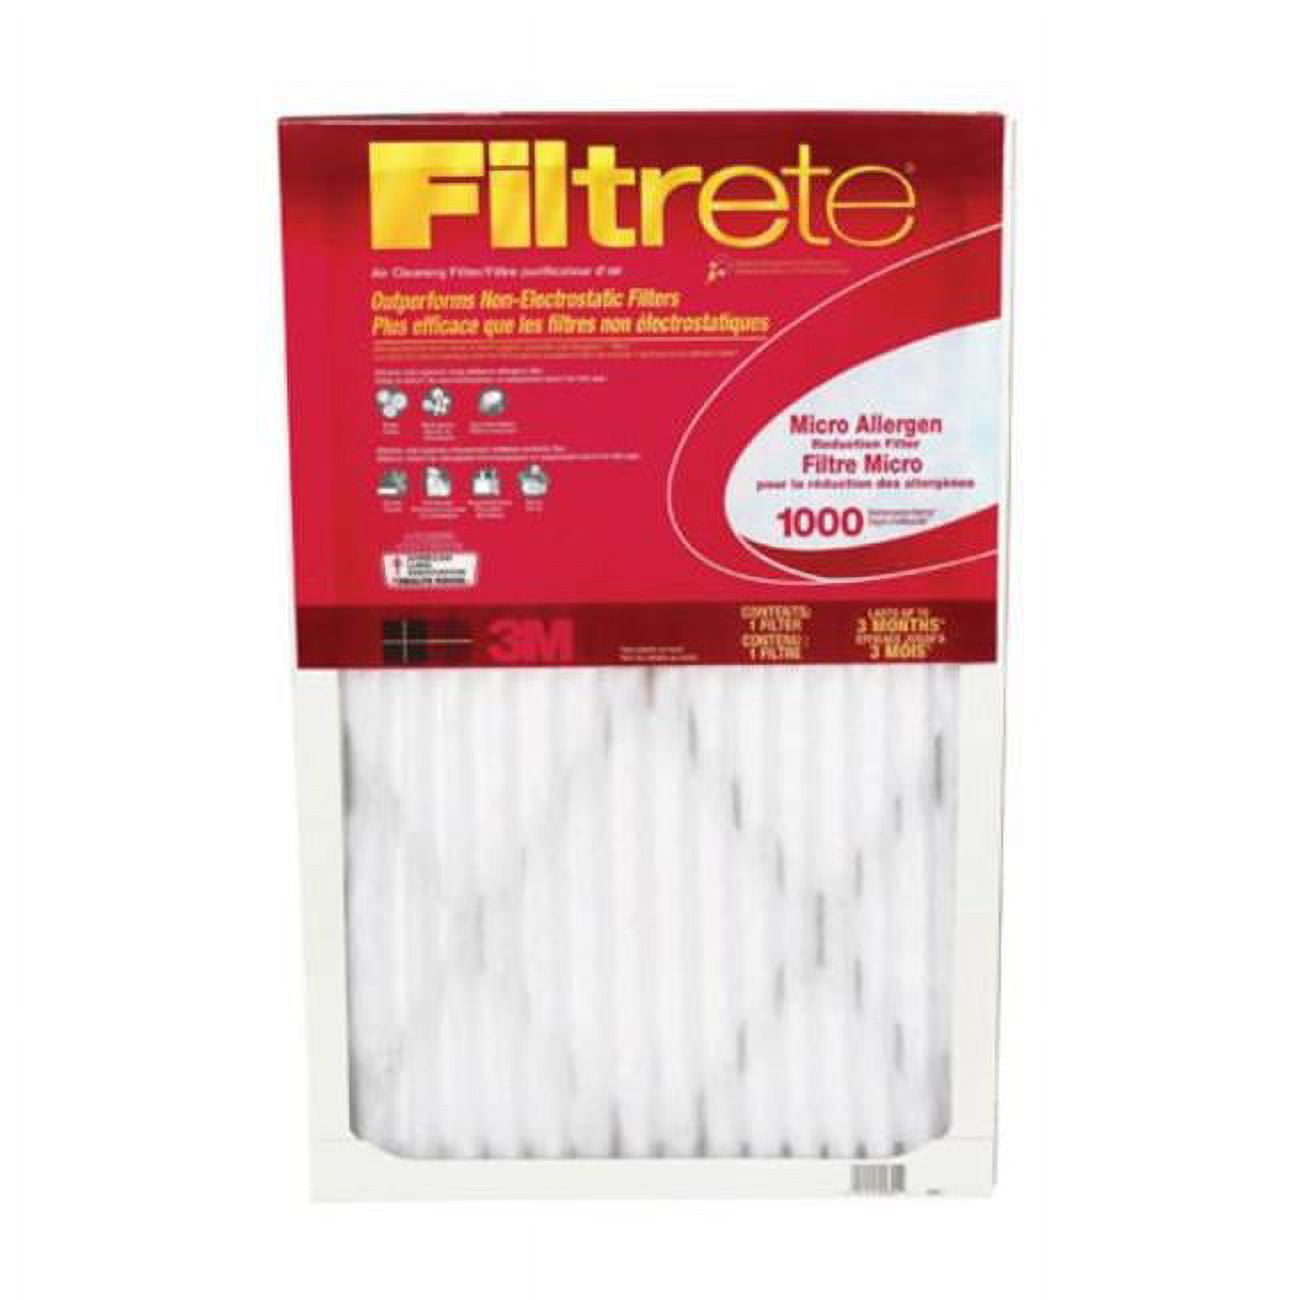 Picture of 3M 4172722 Air Filter Micro Allergen Reduction